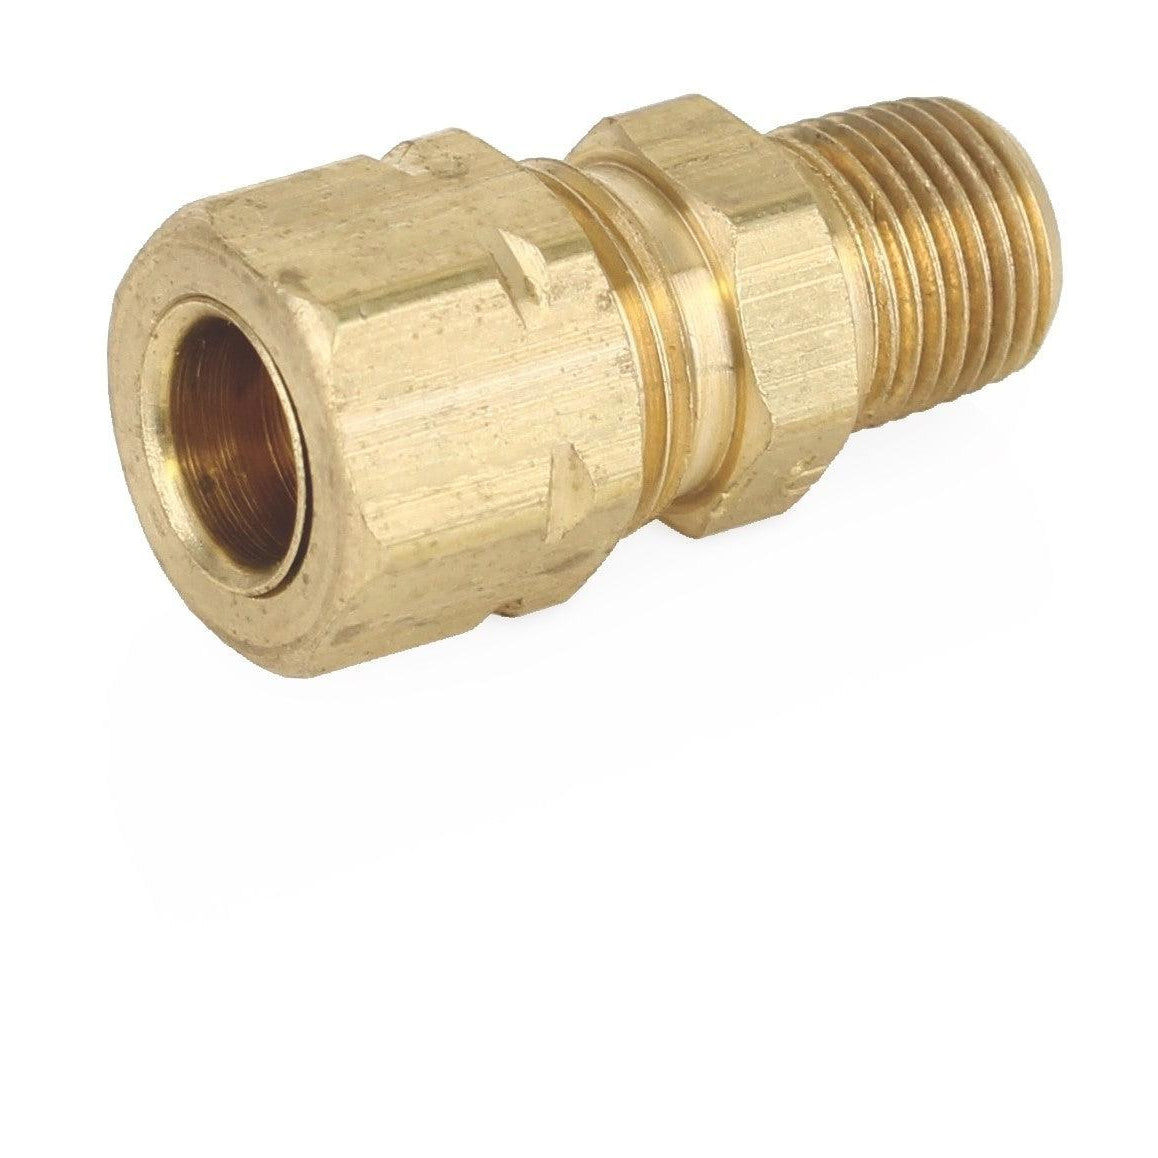 Fitting - Male Connector, 5/16 inch (7.94 mm) tube x 1/8 inch (3.2 mm) NPTF